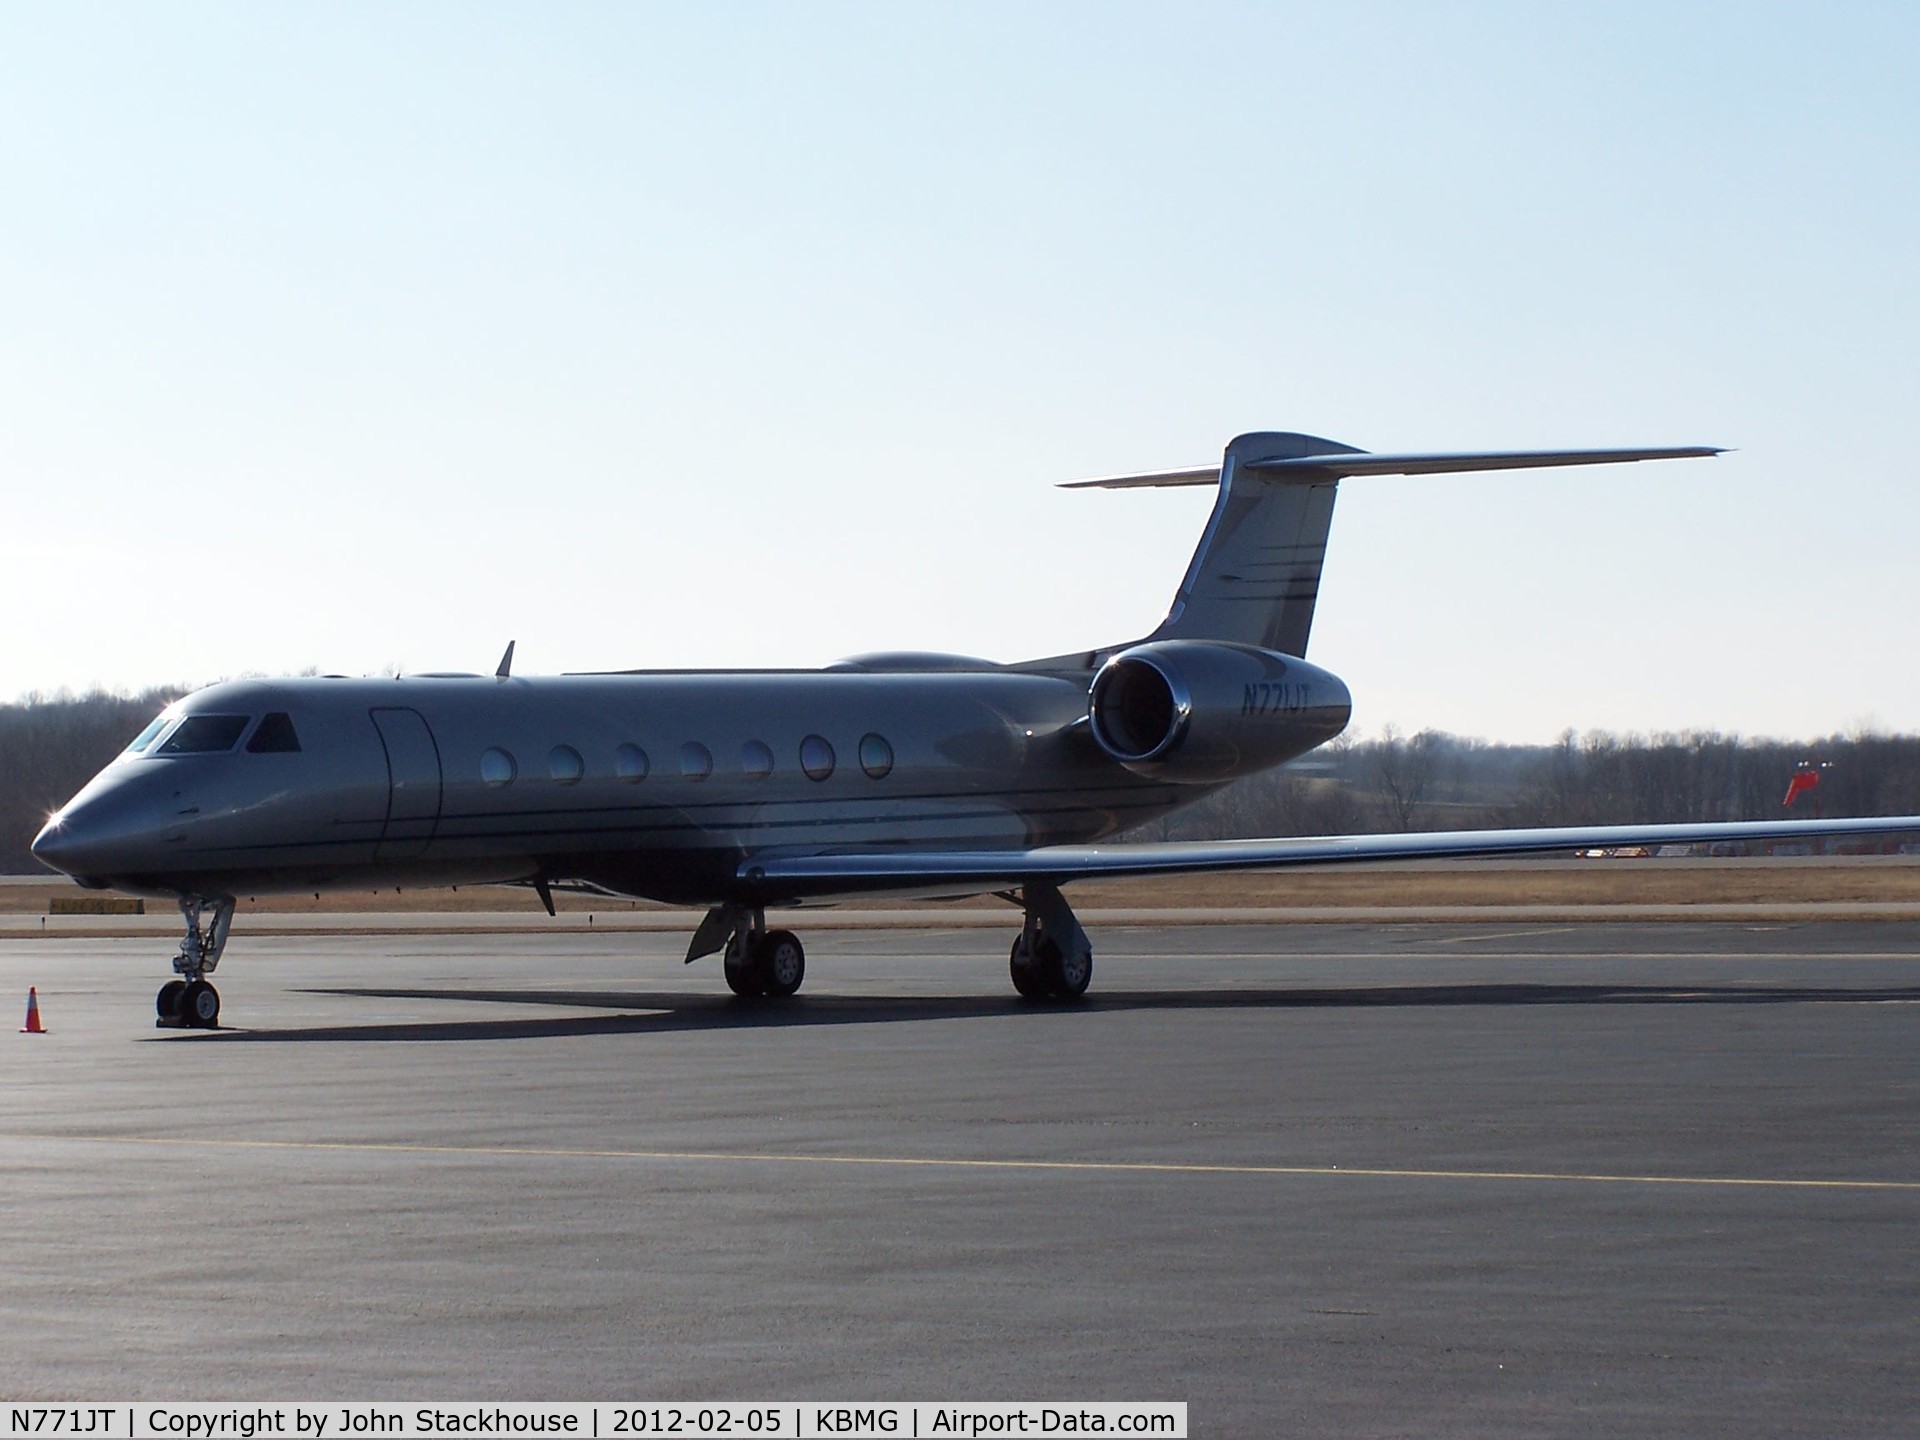 N771JT, 2005 Gulfstream Aerospace GV-SP (G550) C/N 5089, John Travolta in for the Super Bowl in Indy.  Aircraft is at KBMG - Bloomington, IN